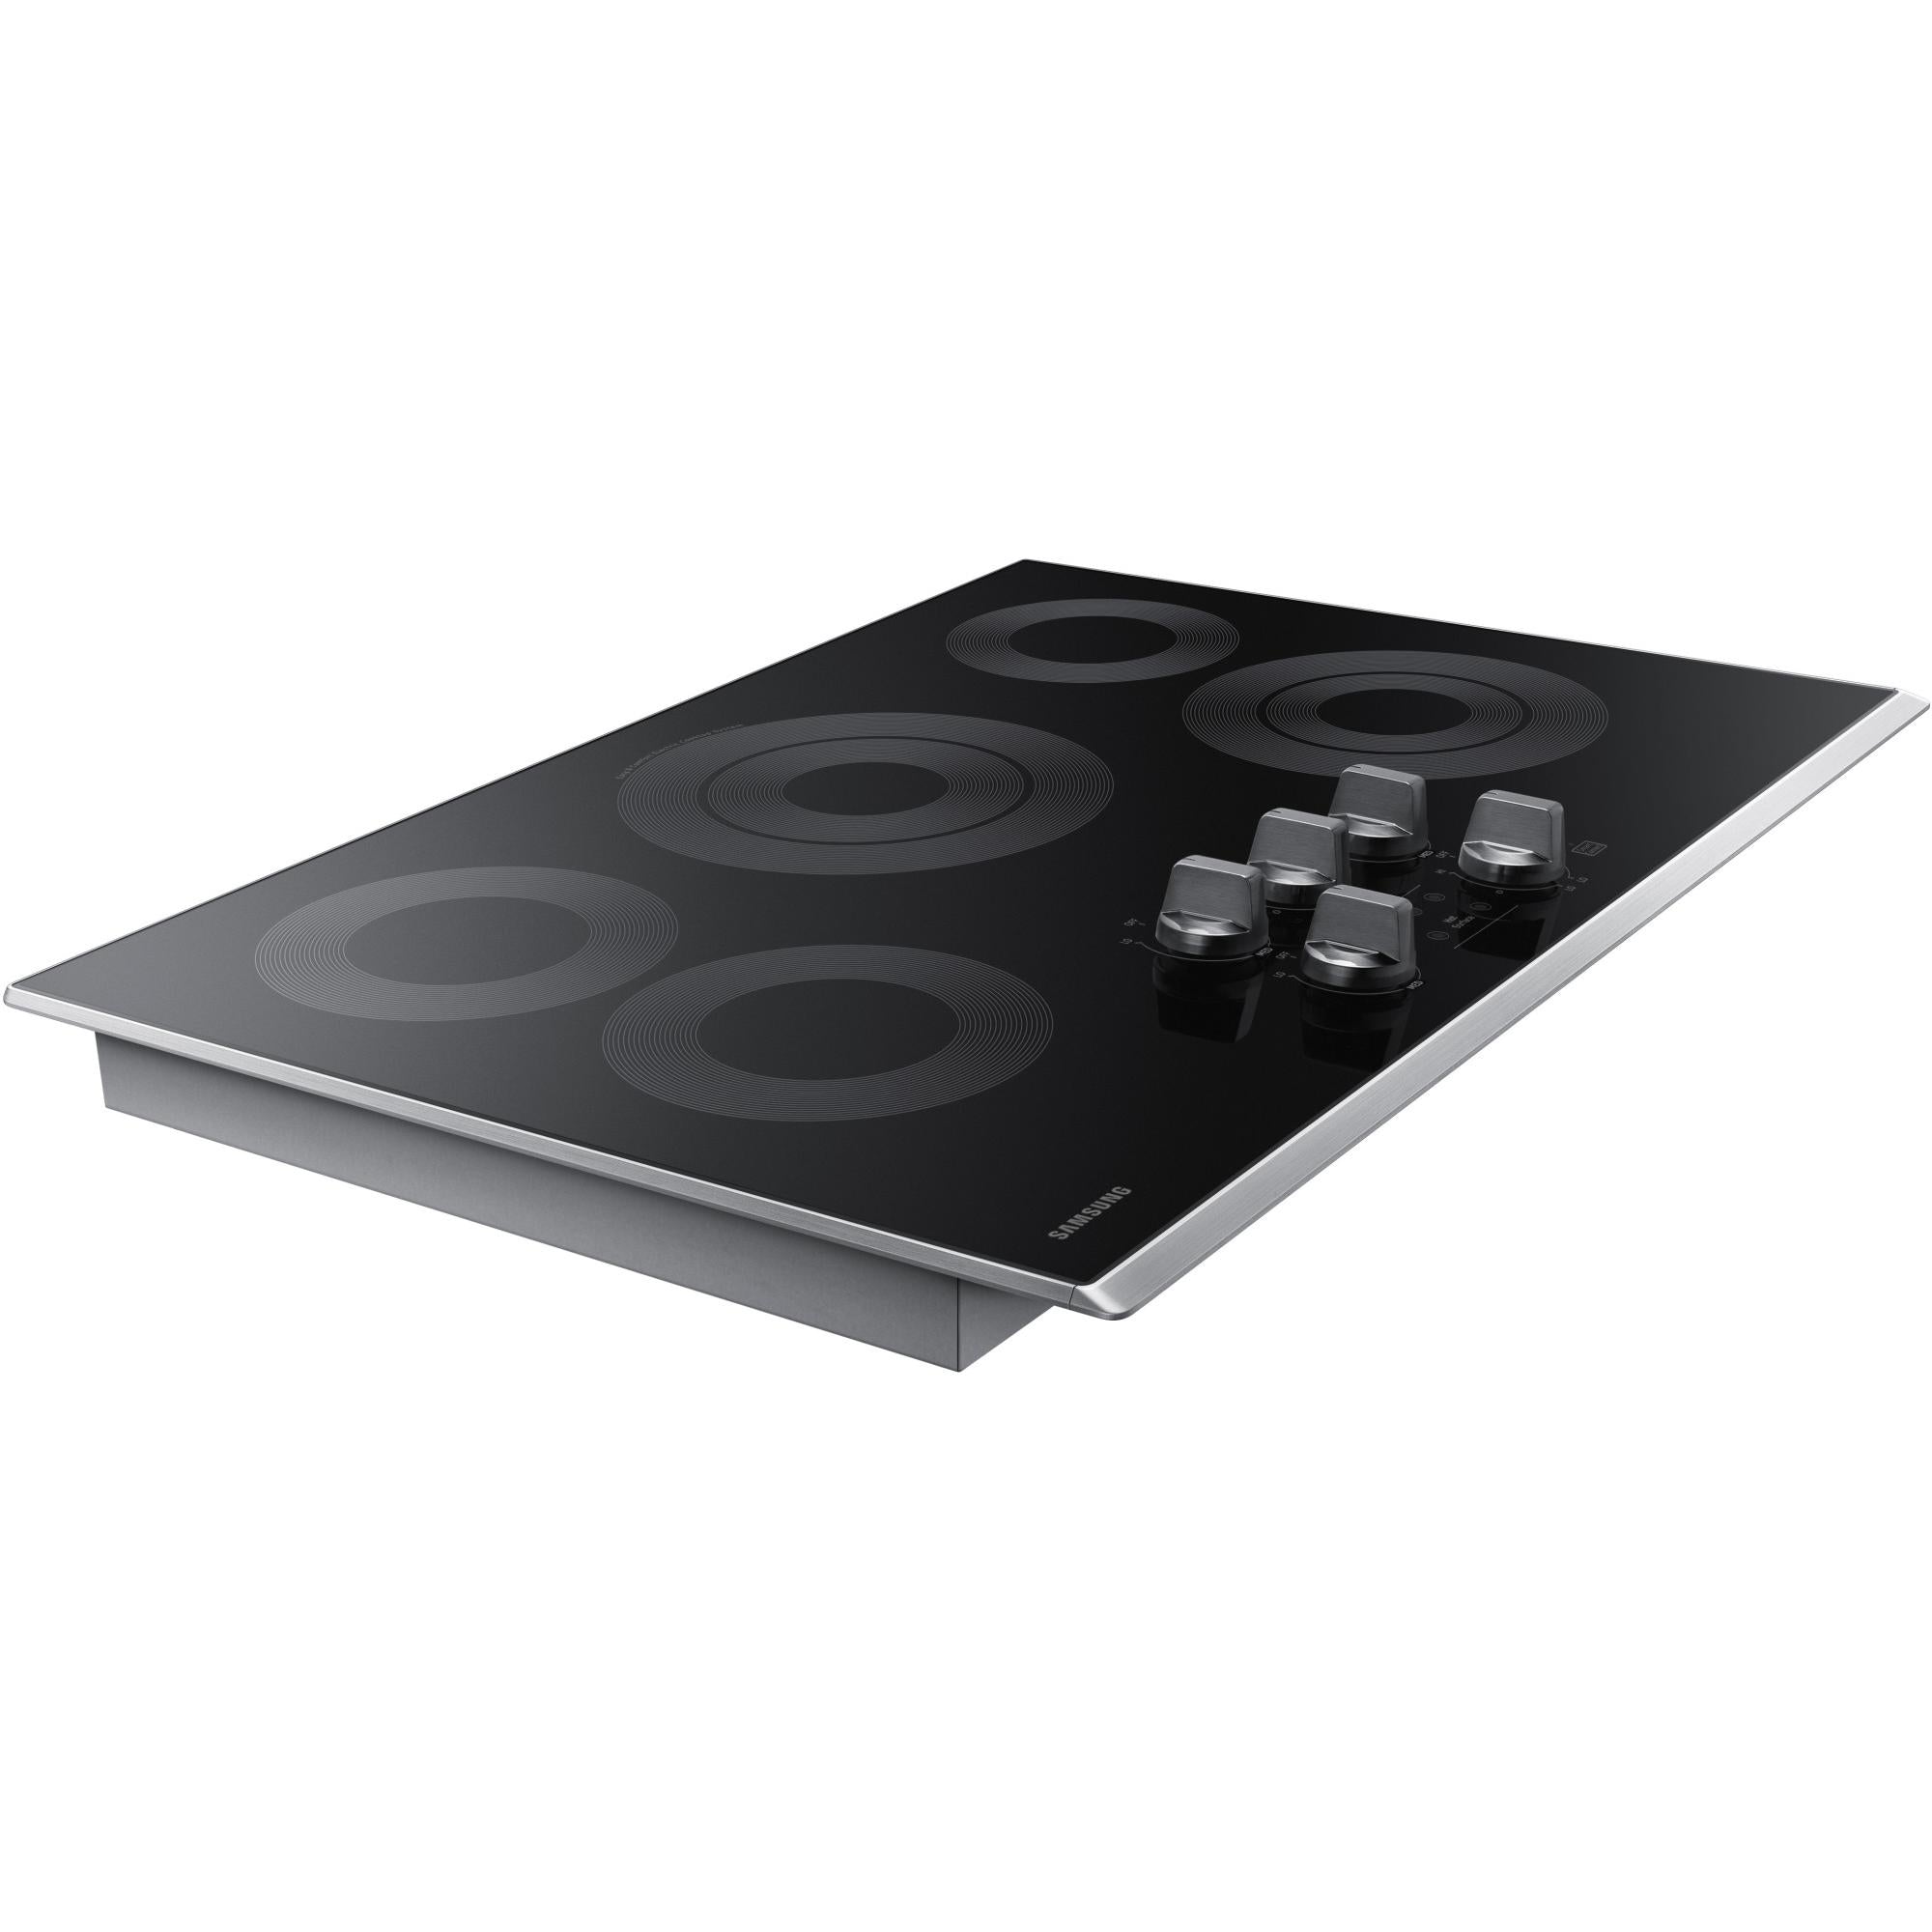 Samsung 30-inch Built-In Electric Cooktop NZ30K6330RS/AA